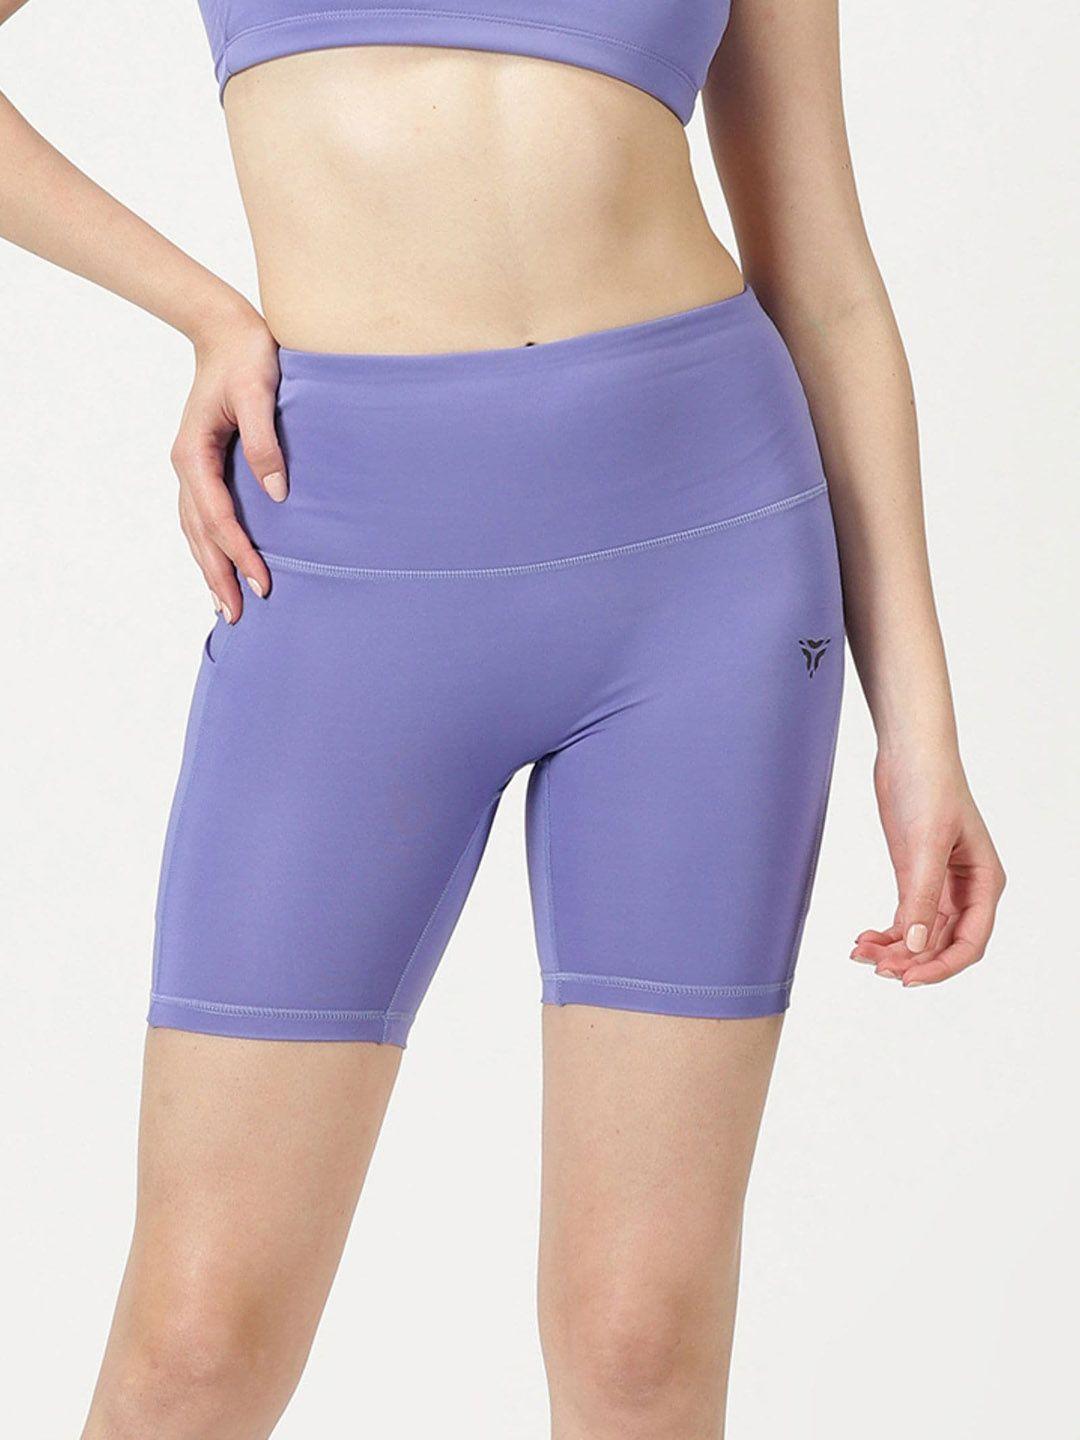 deb women lavender skinny fit high-rise running fashion with antimicrobial technology shorts